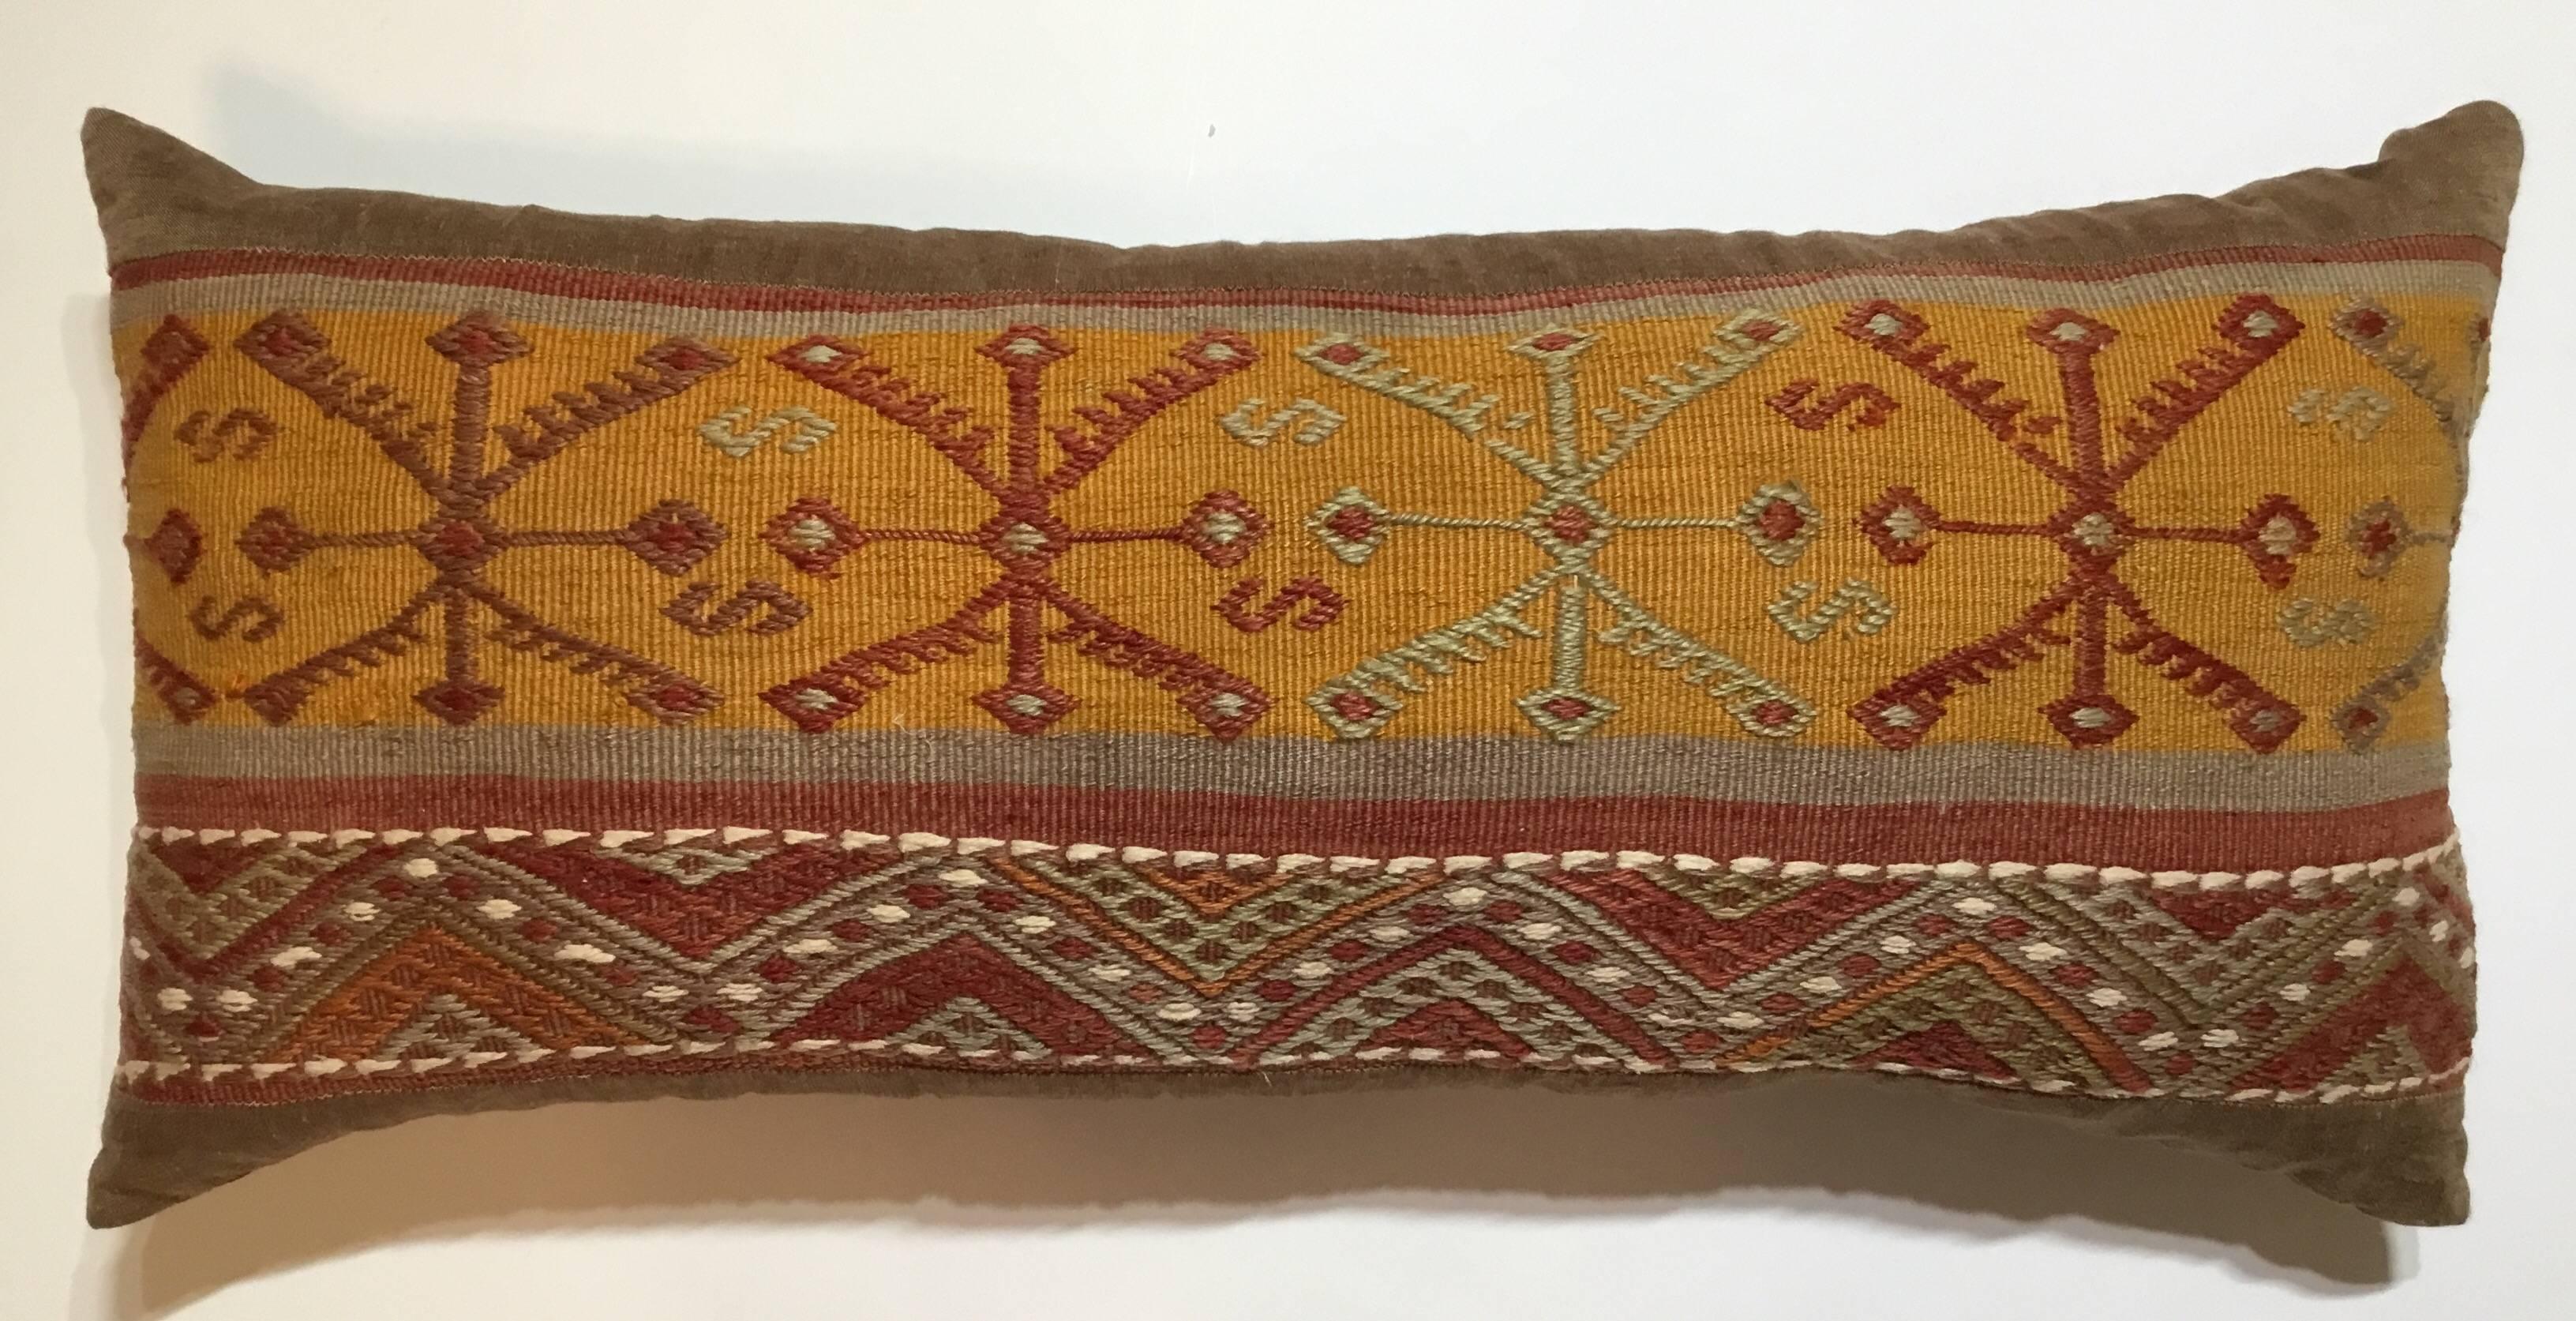 Beautiful pillow made of handwoven Kilim rug fragment, interesting geometric motif on soft muster and solomon colors.
Sides and backing made of fine linen, frash insert.